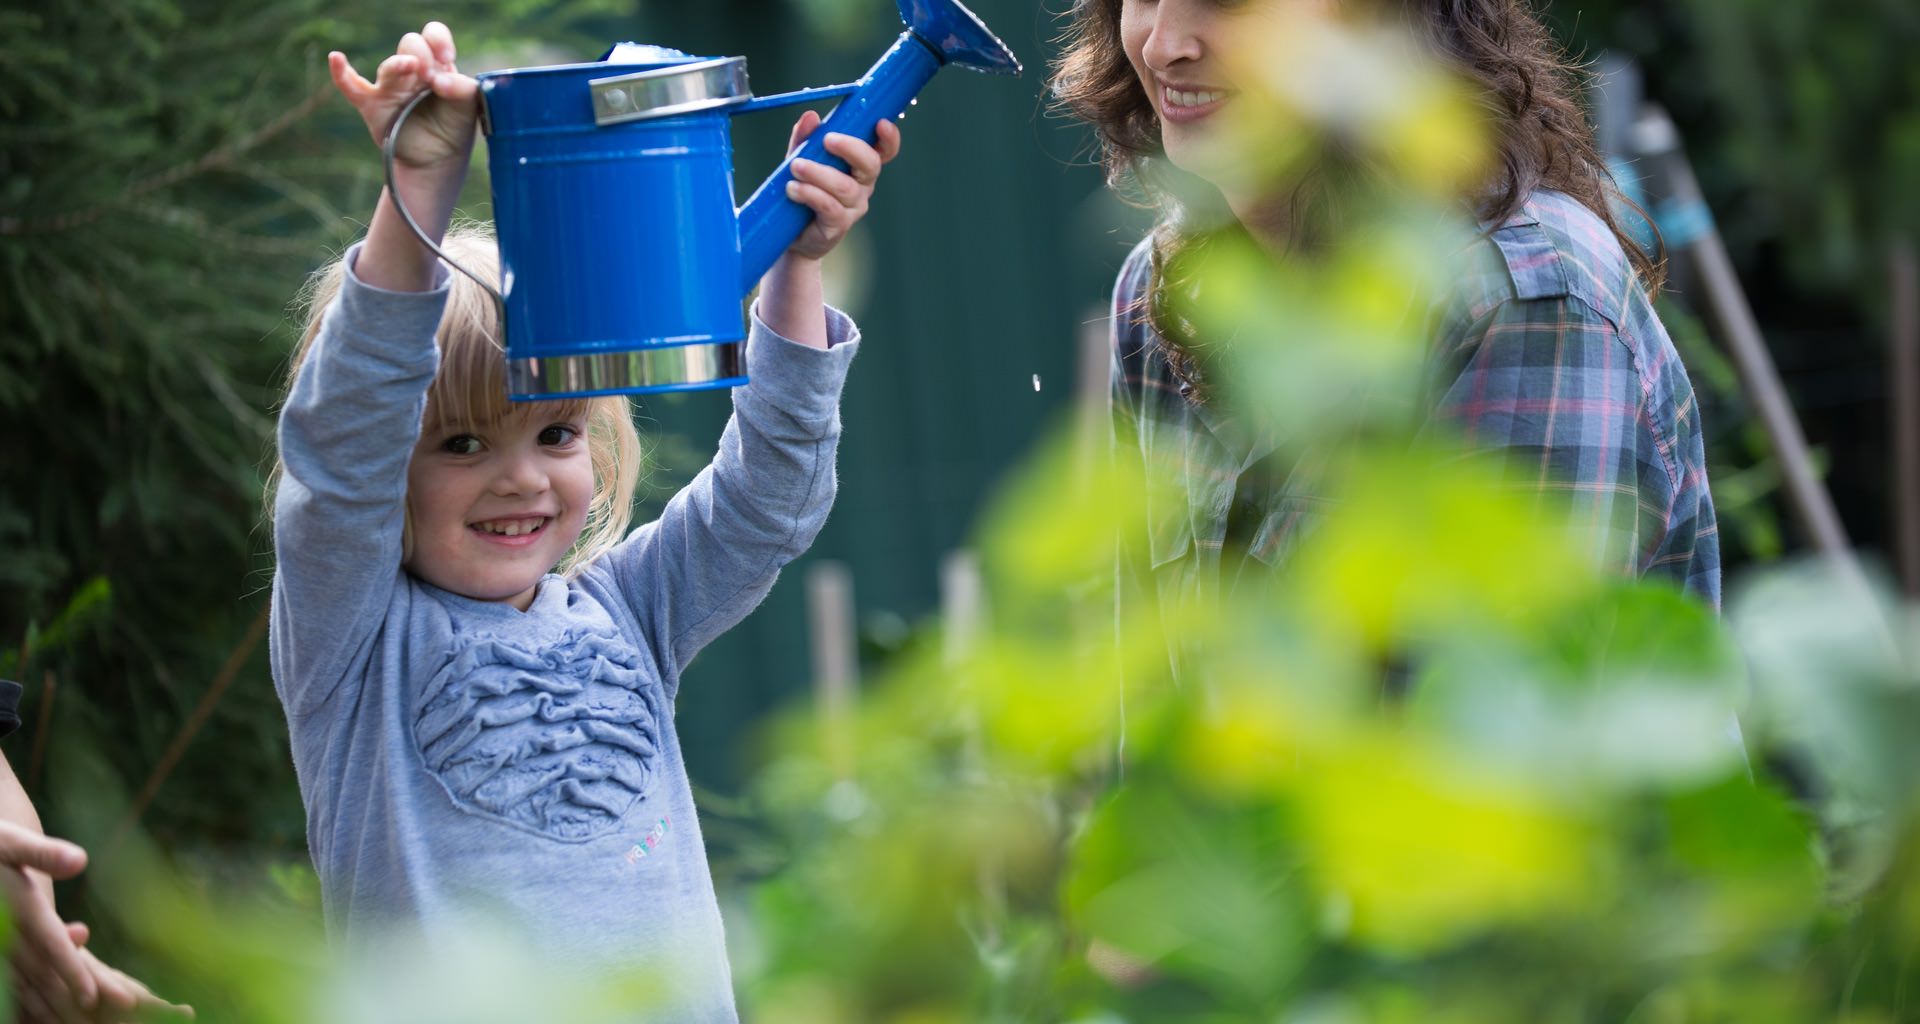 Young Girl Holding A Watering Can In Home Garden